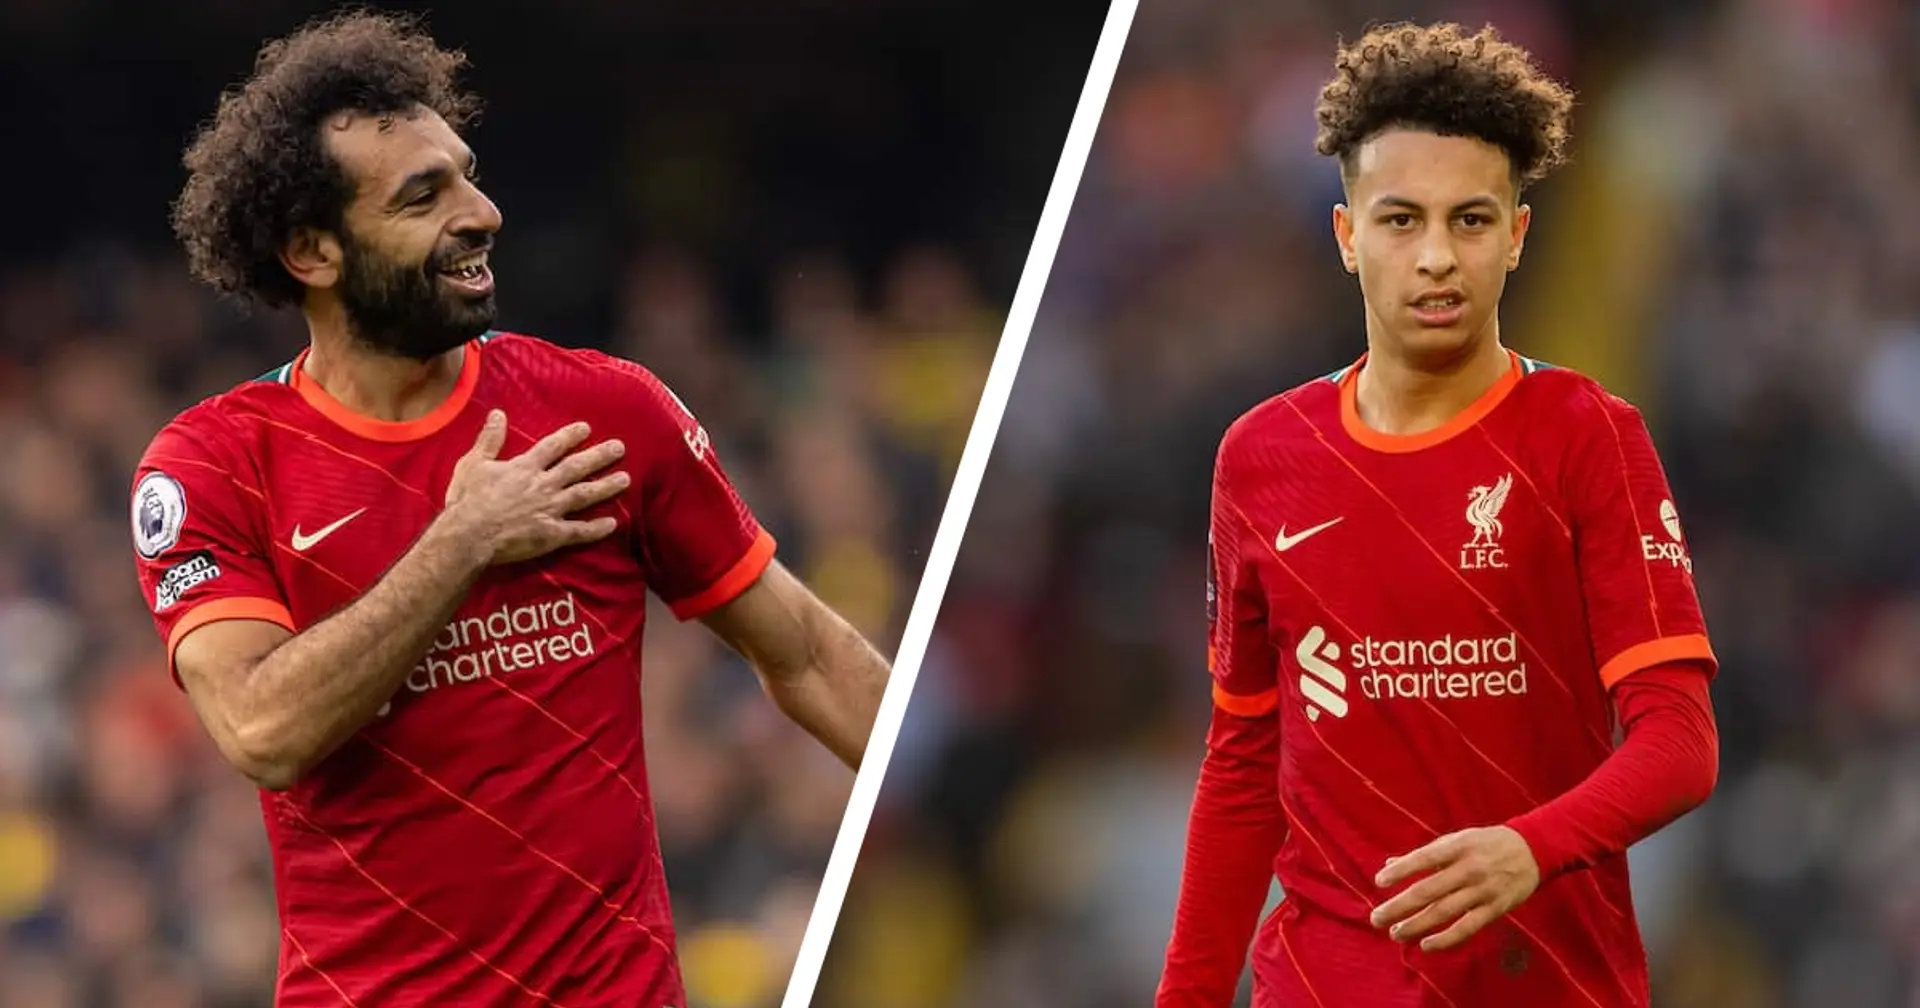 'I've done gym sessions with him!': Kaide Gordon opens up on Salah's influence 